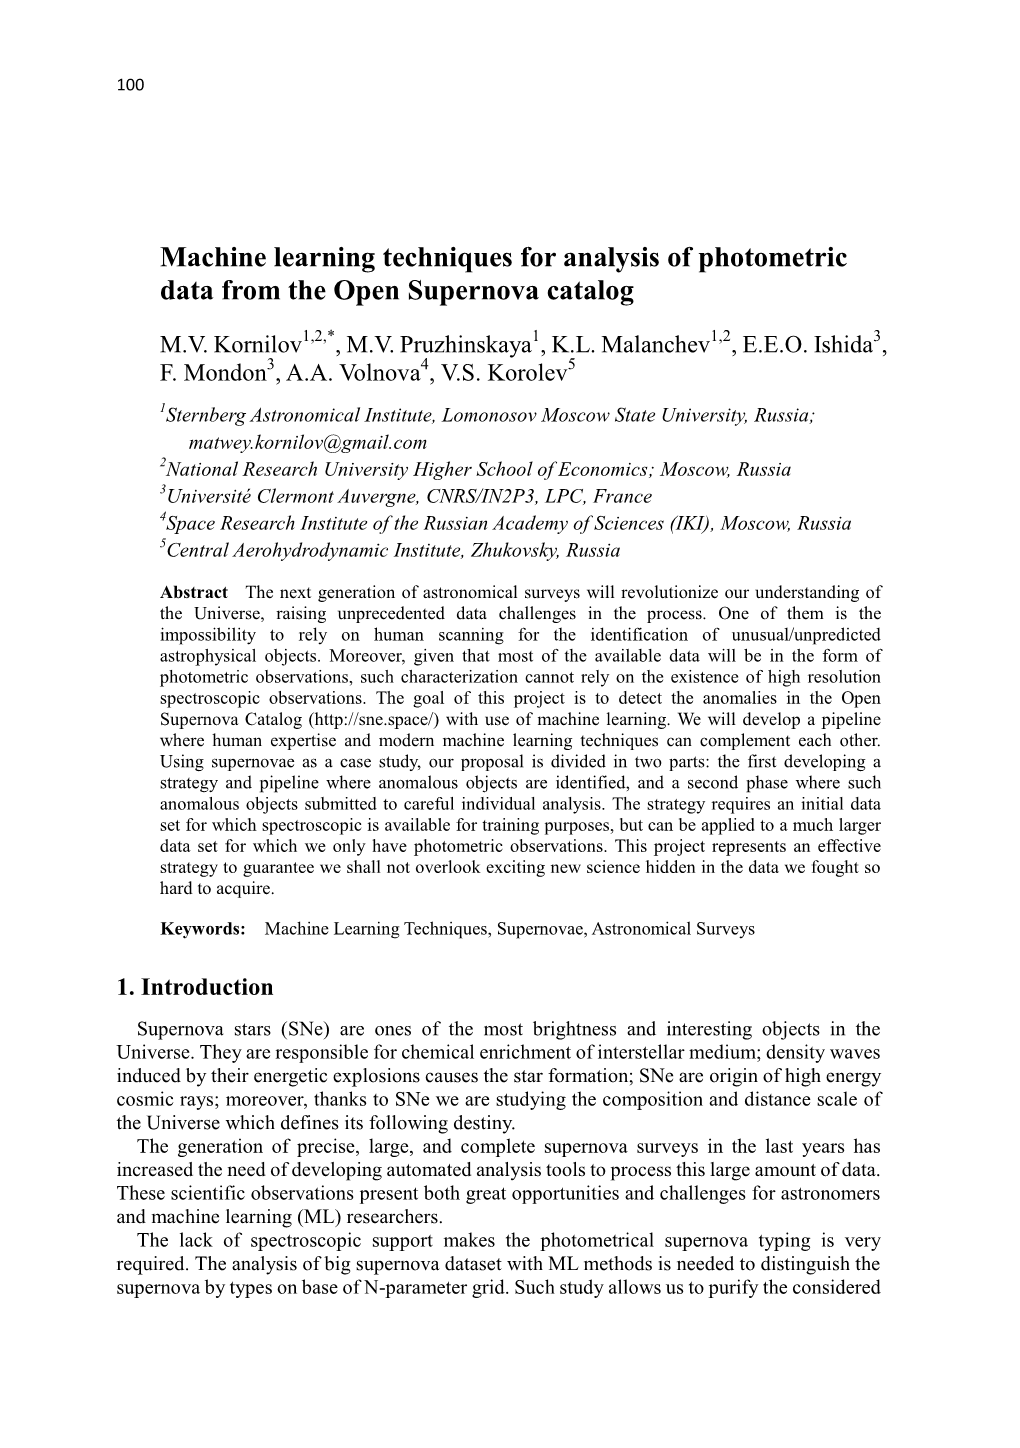 Machine Learning Techniques for Analysis of Photometric Data from the Open Supernova Catalog